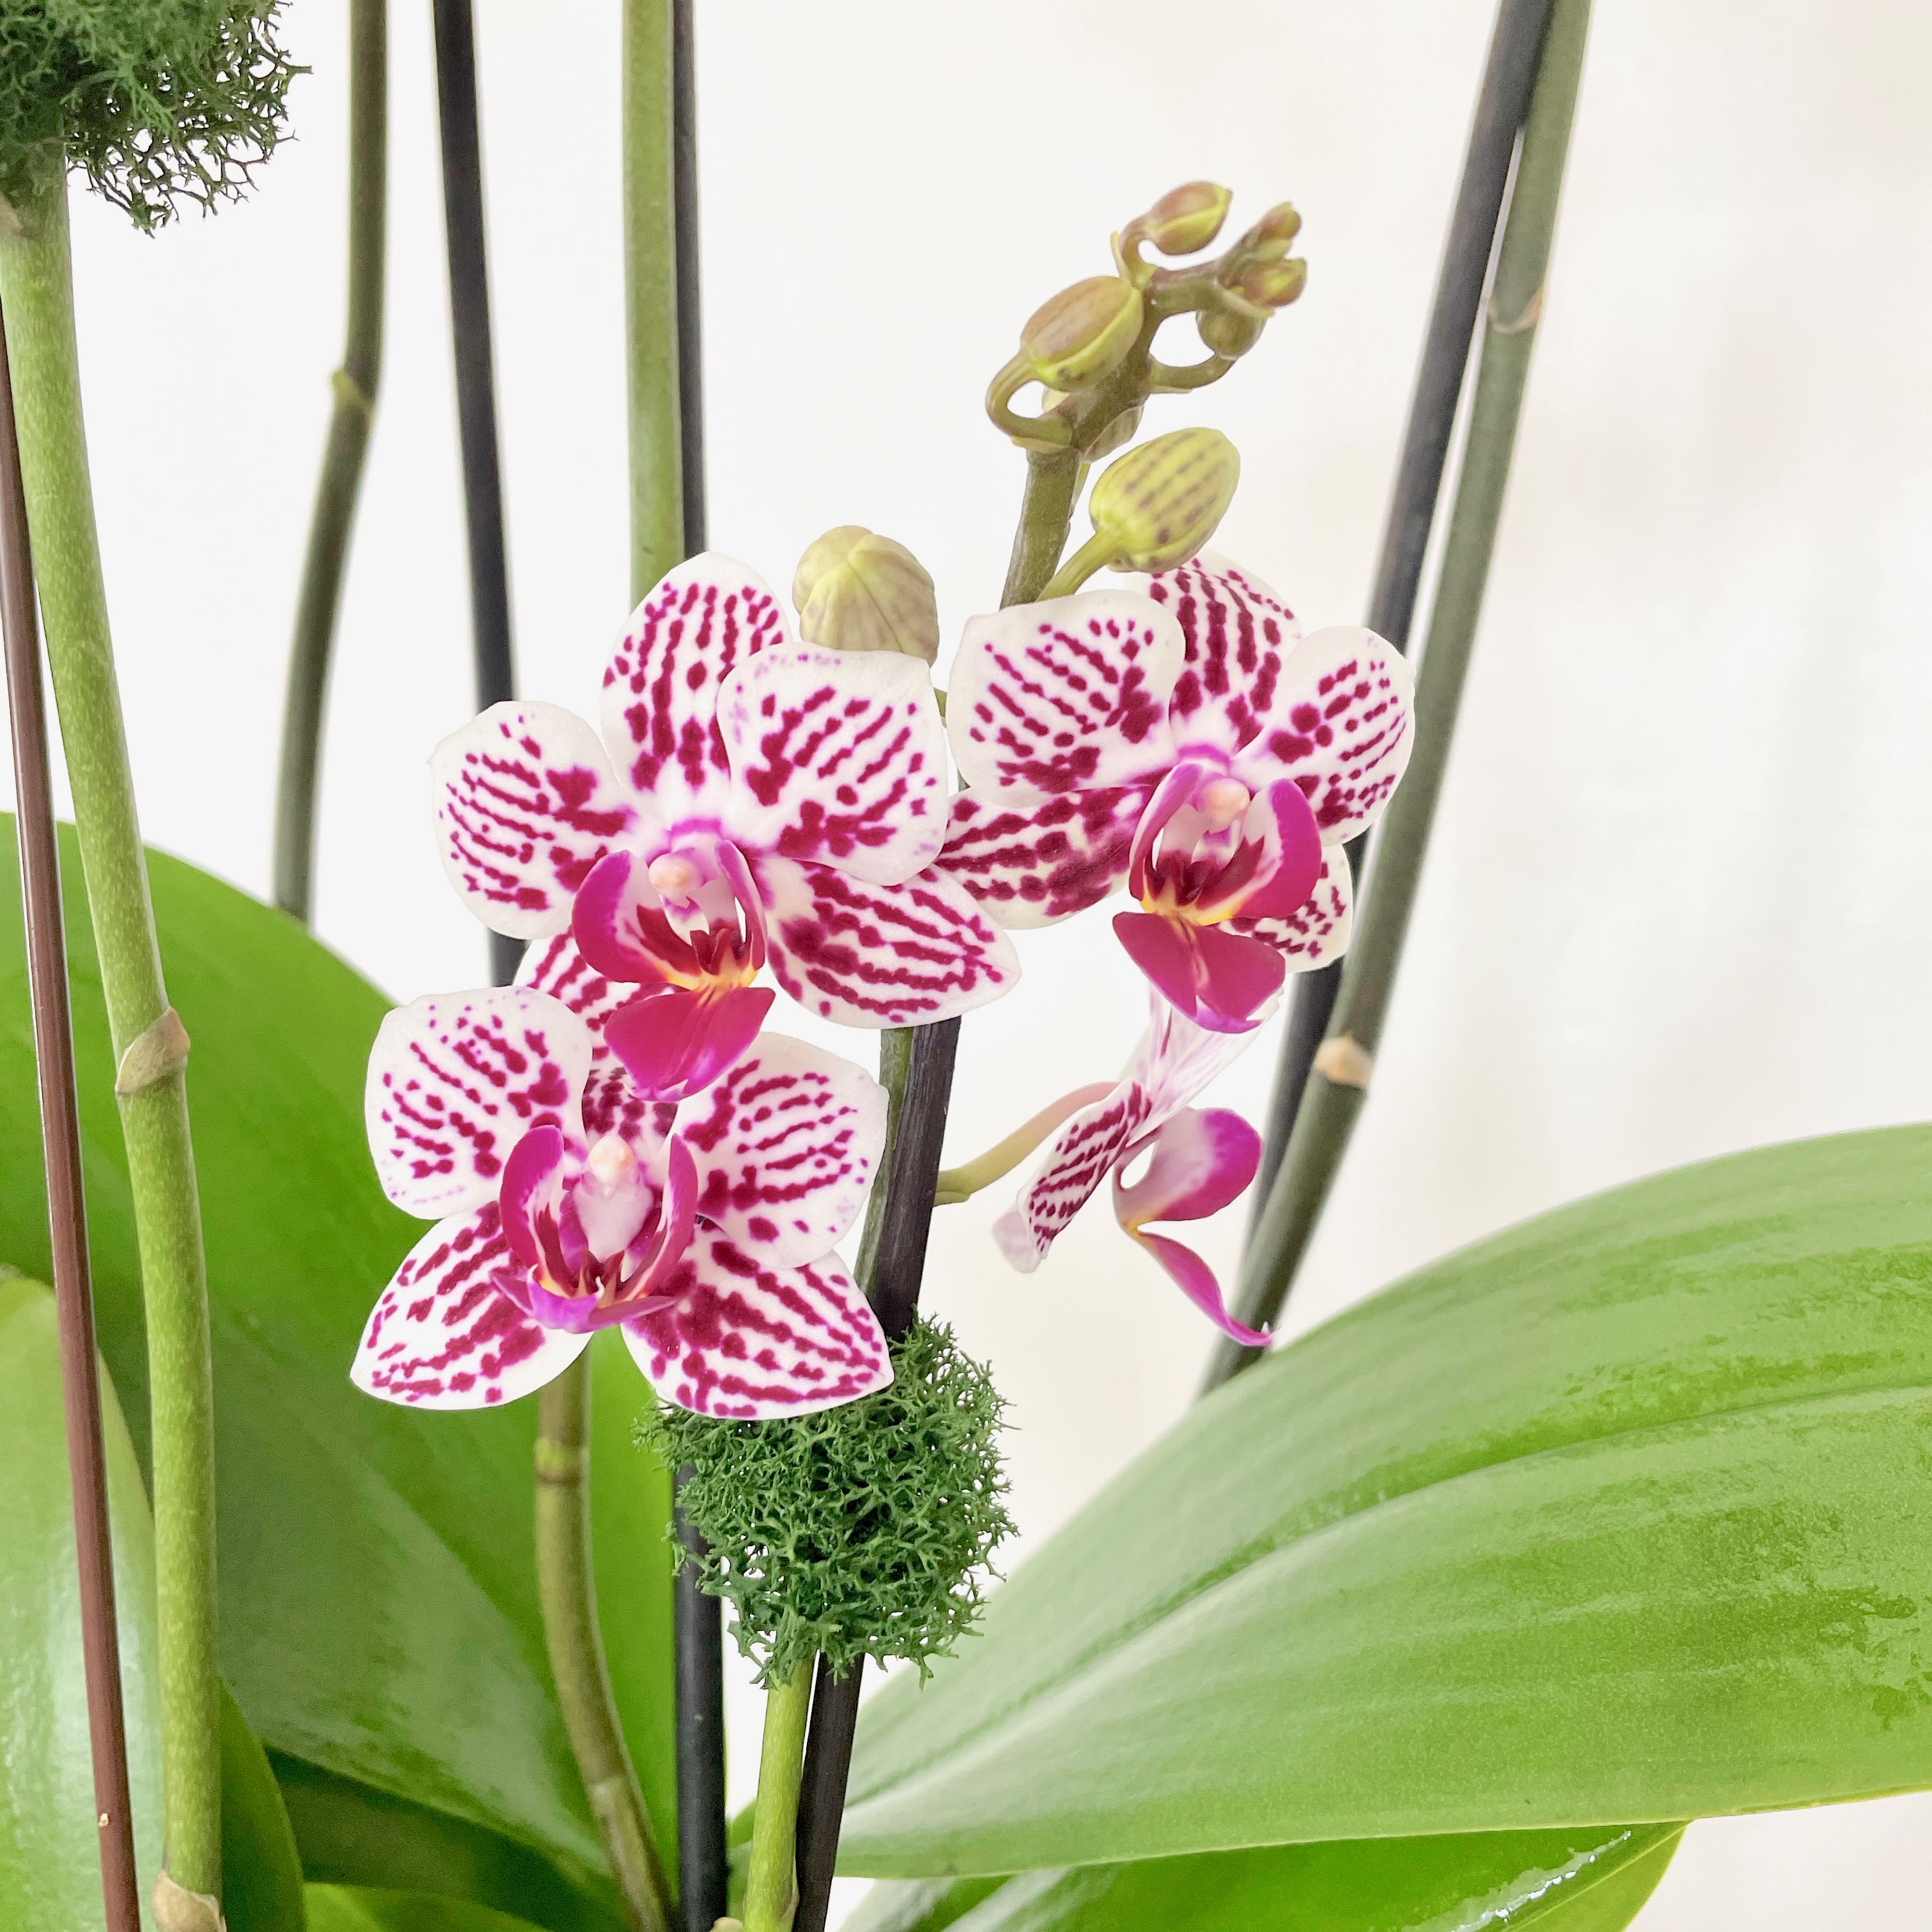 Is sphagnum moss an appropriate medium for Phalaenopsis orchids? I just  bought a Phalaenopsis that was planted in a small cup of sphagnum. Is it  safe to keep it that way, or